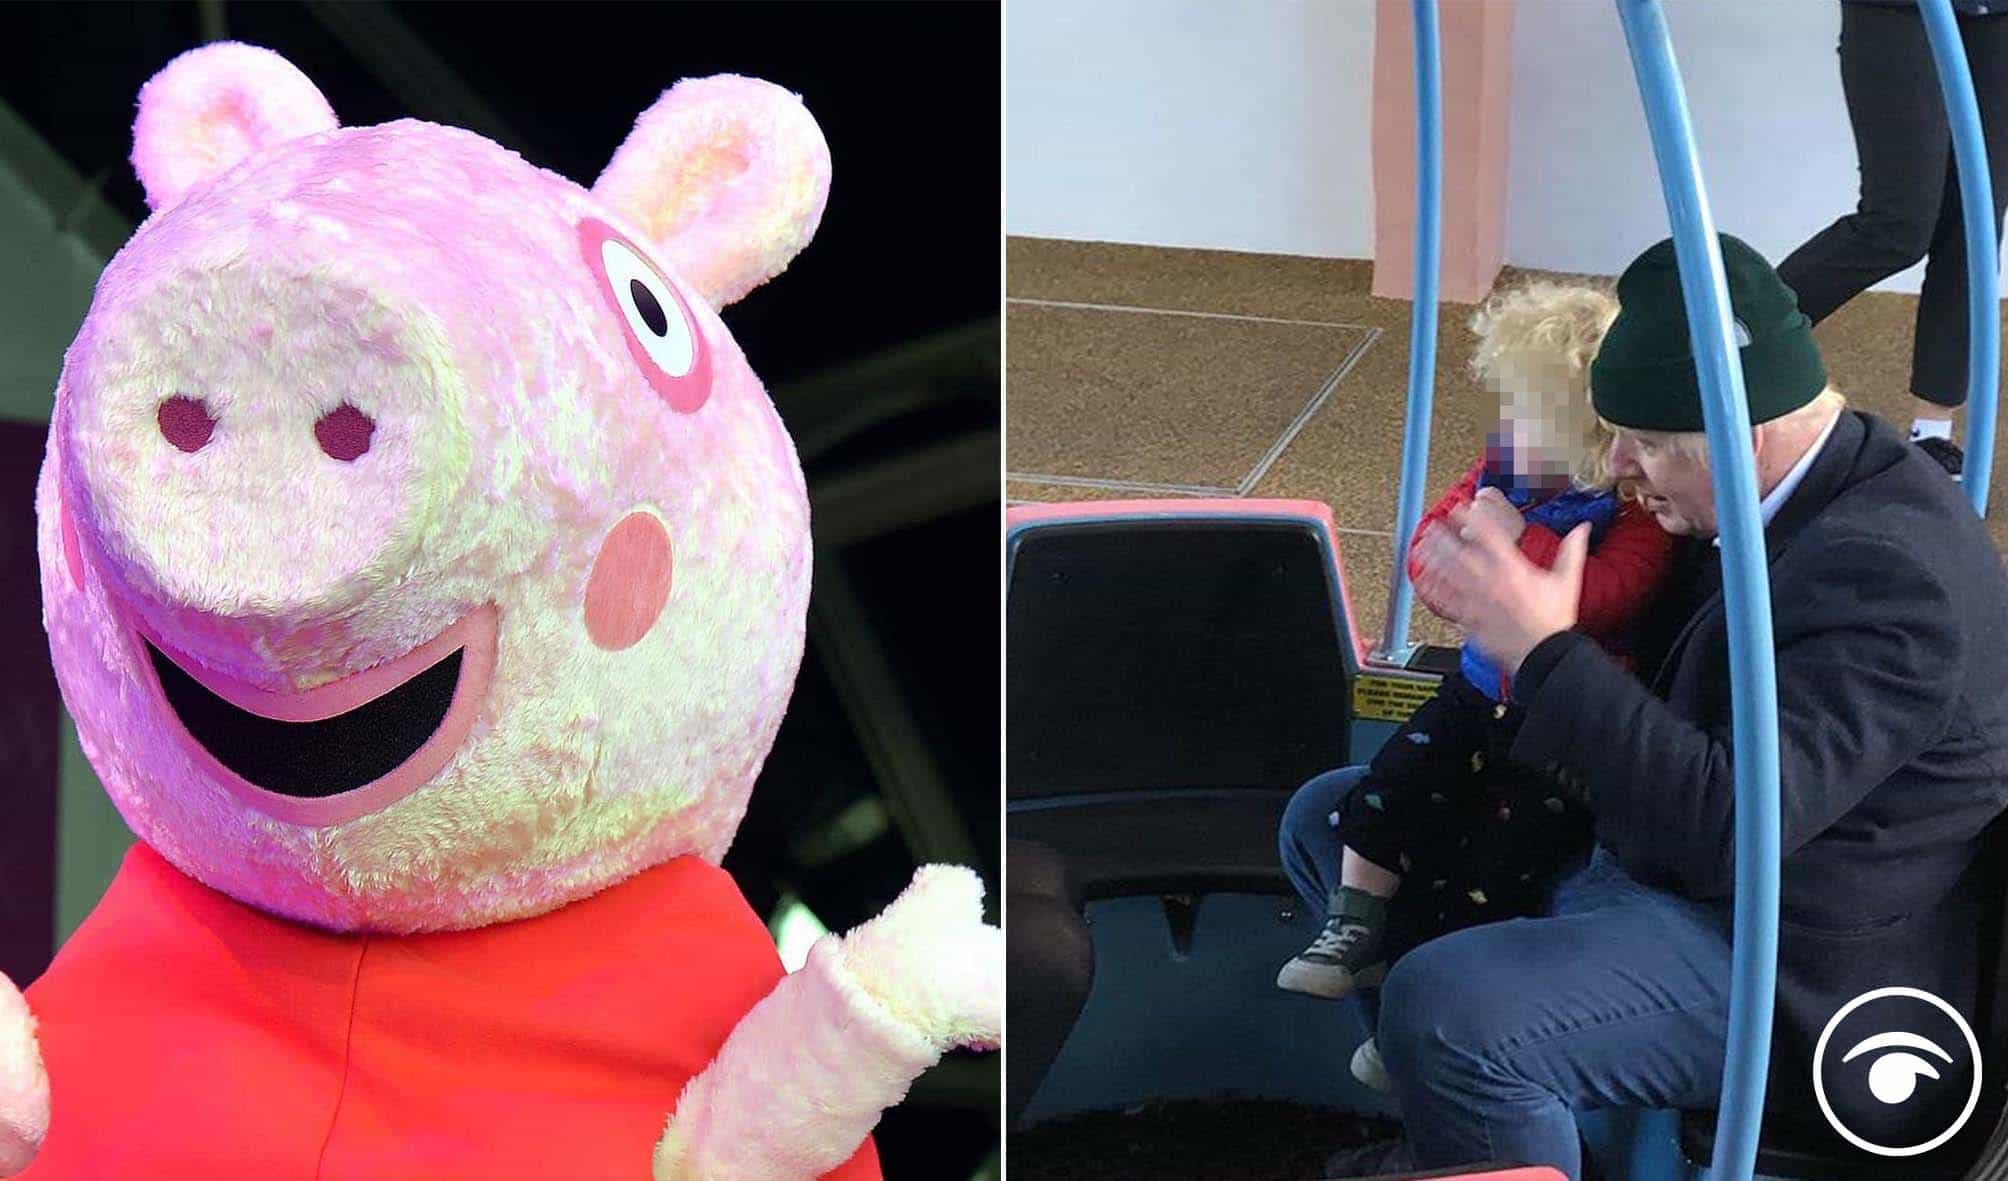 Watch: Peppa Pig World ’employee’ gives hilarious interview about PM’s visit